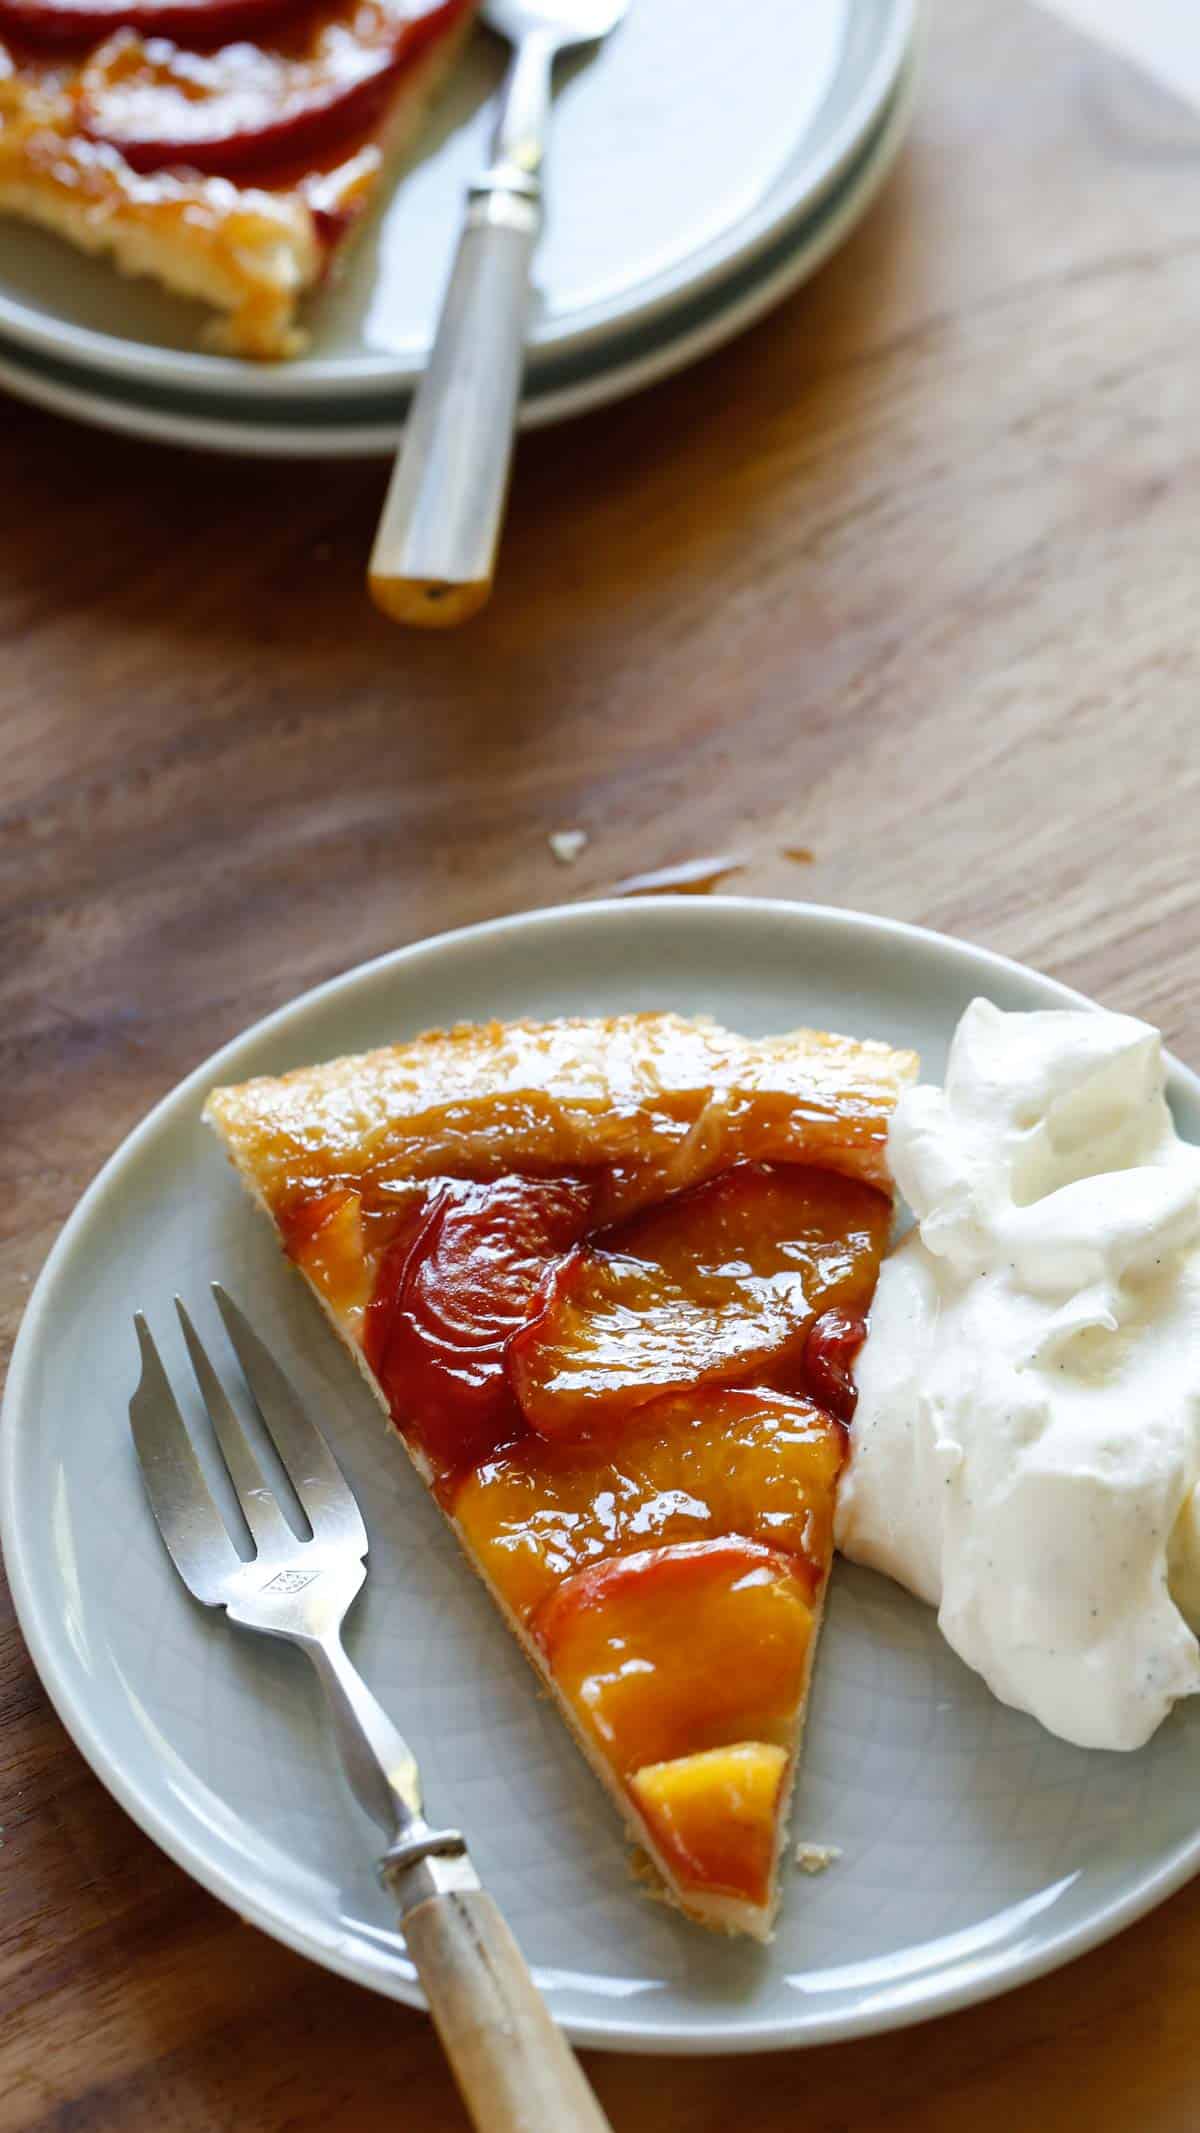 a slice of peach tarte on a plate with whipped cream